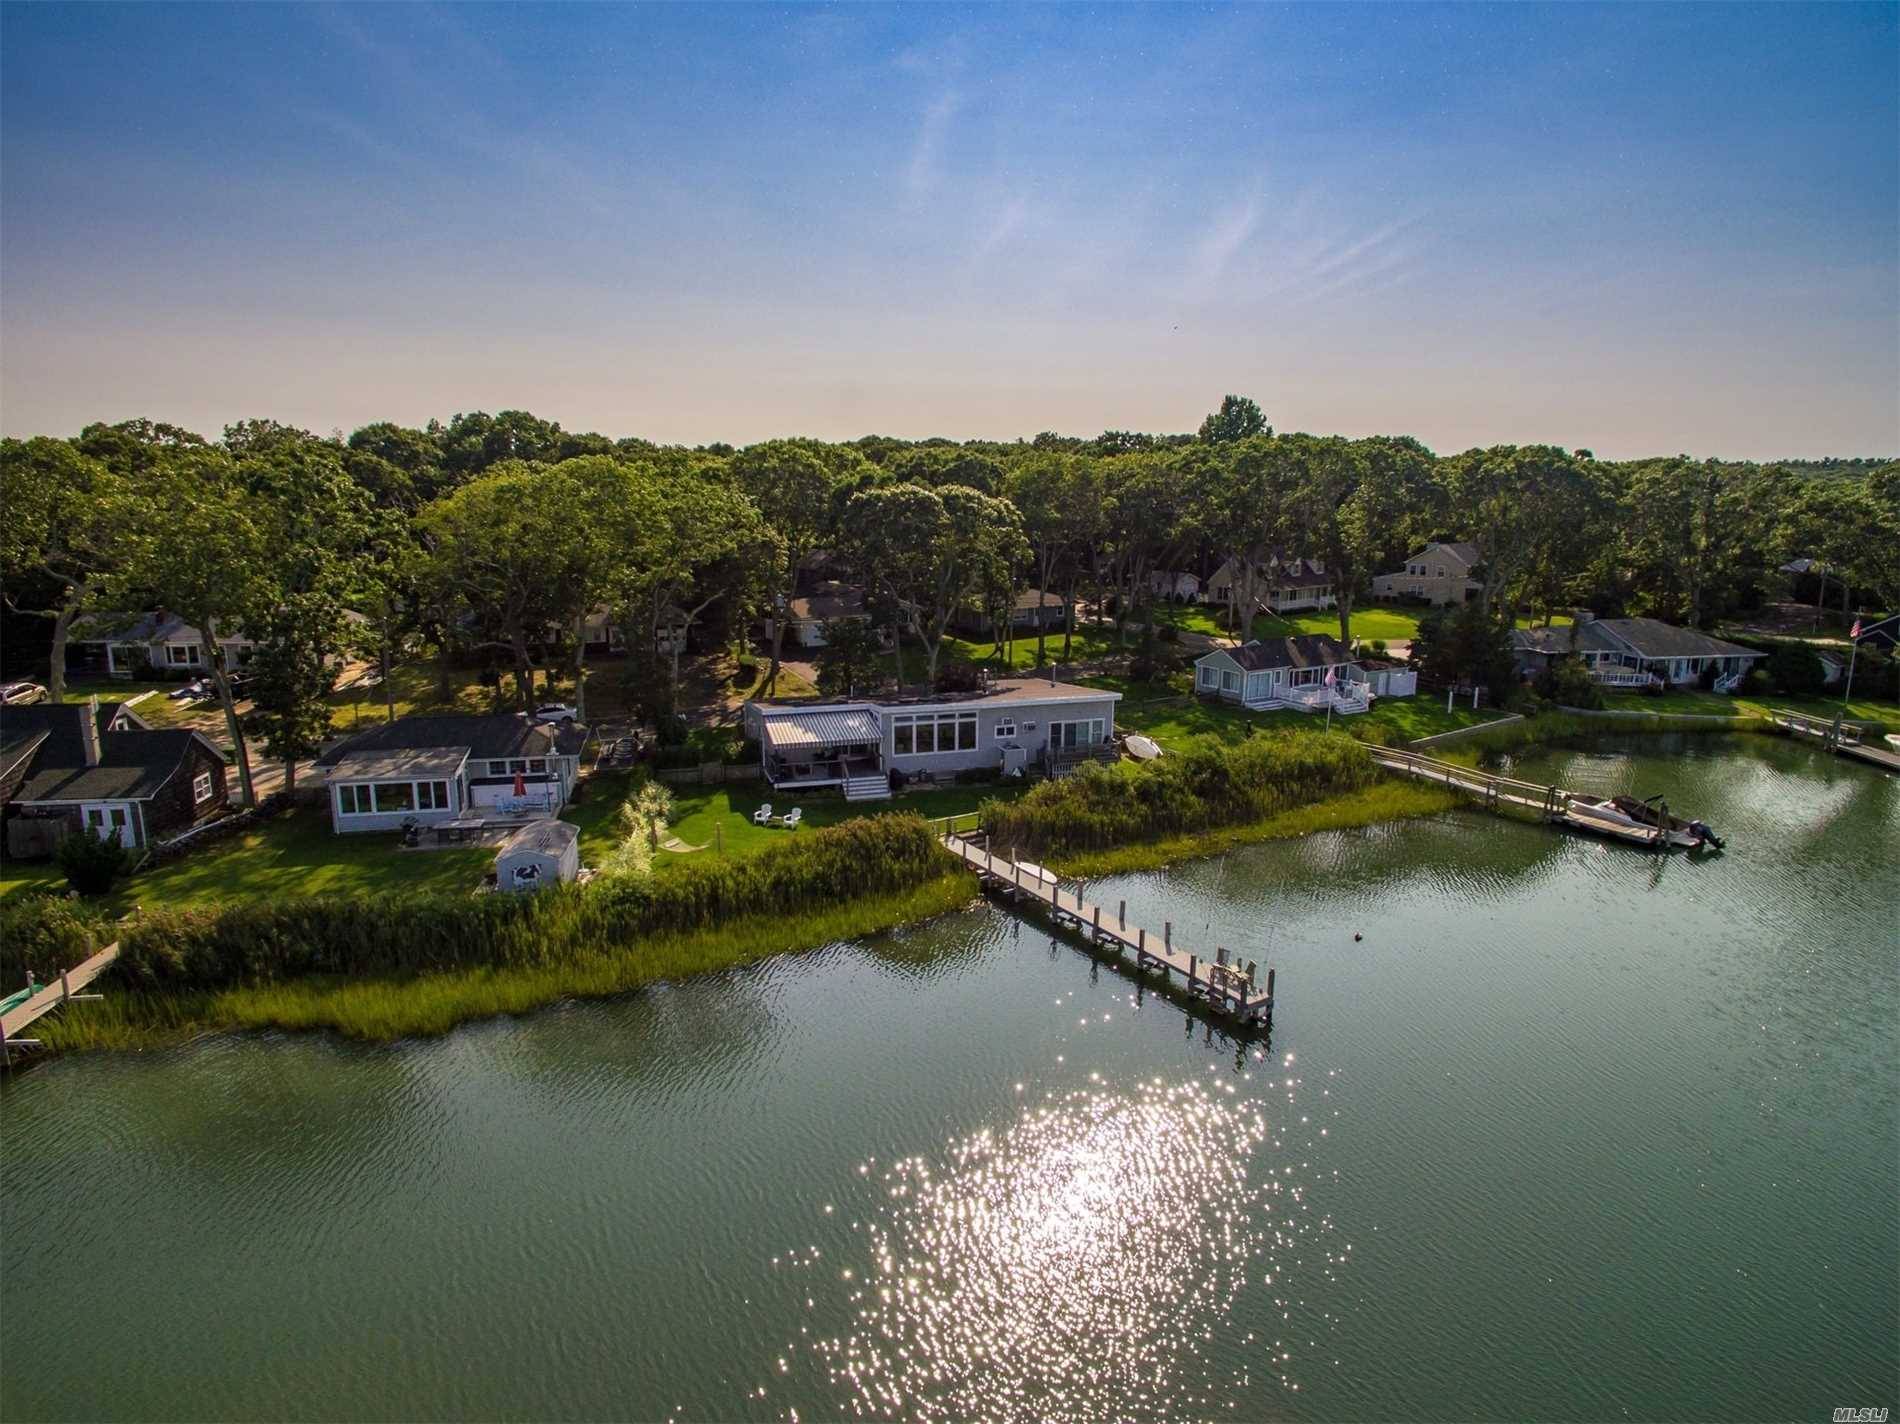 Waterfront - New To The Market - Expansive Views!